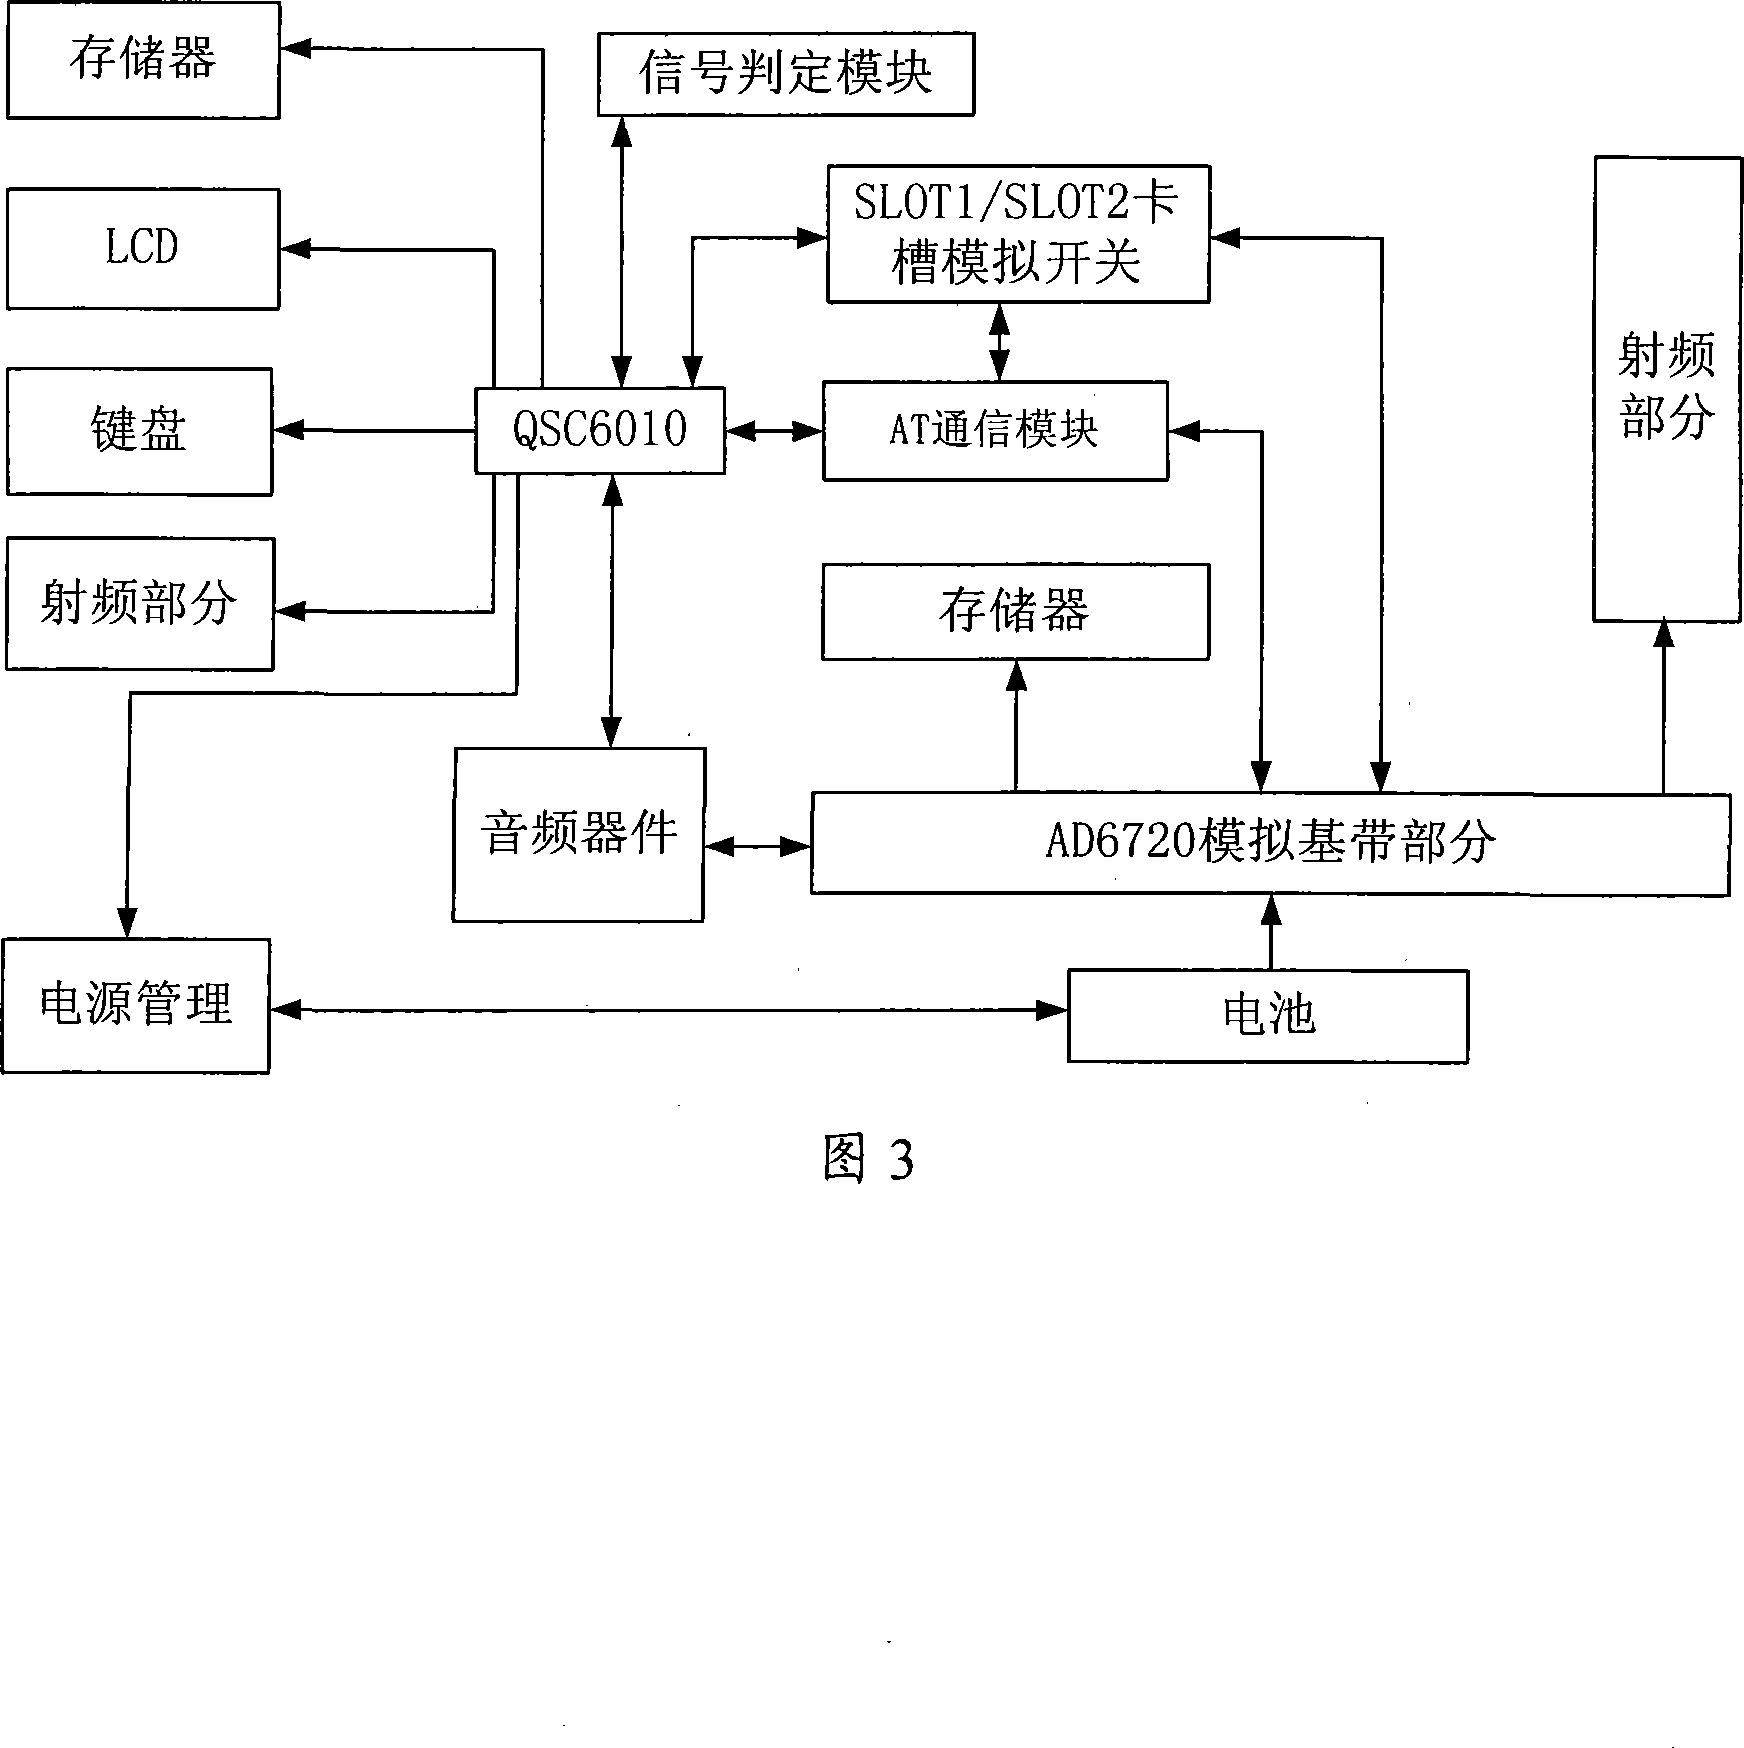 Multi-module machine and implementing method thereof